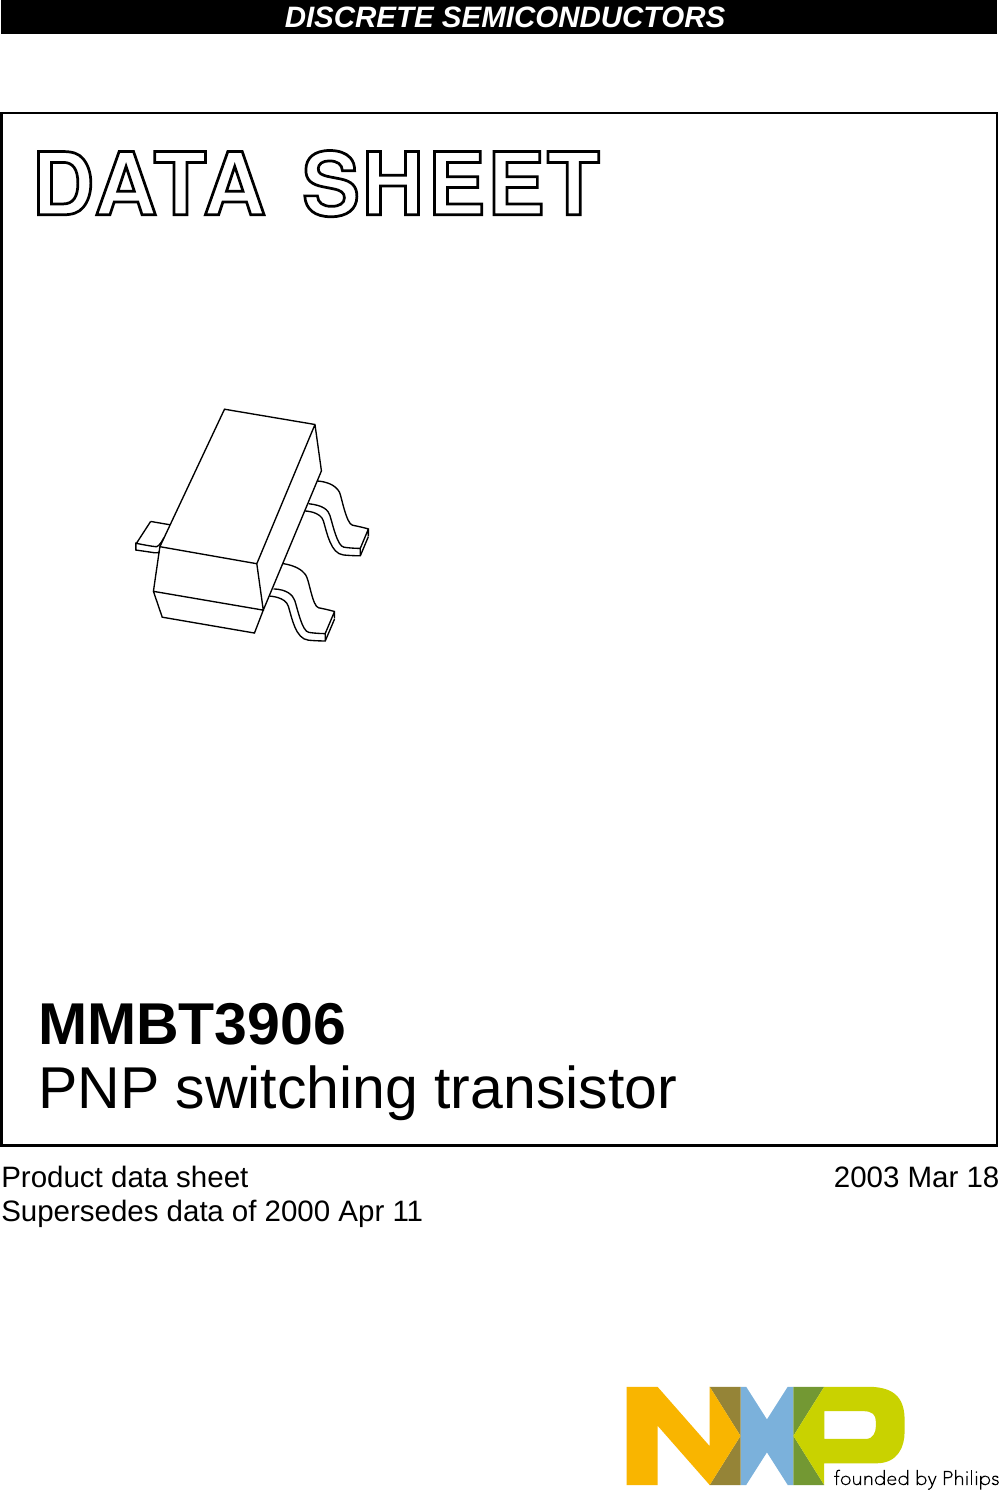 Page 1 of 8 - MMBT3906 PNP Switching Transistor Nxp